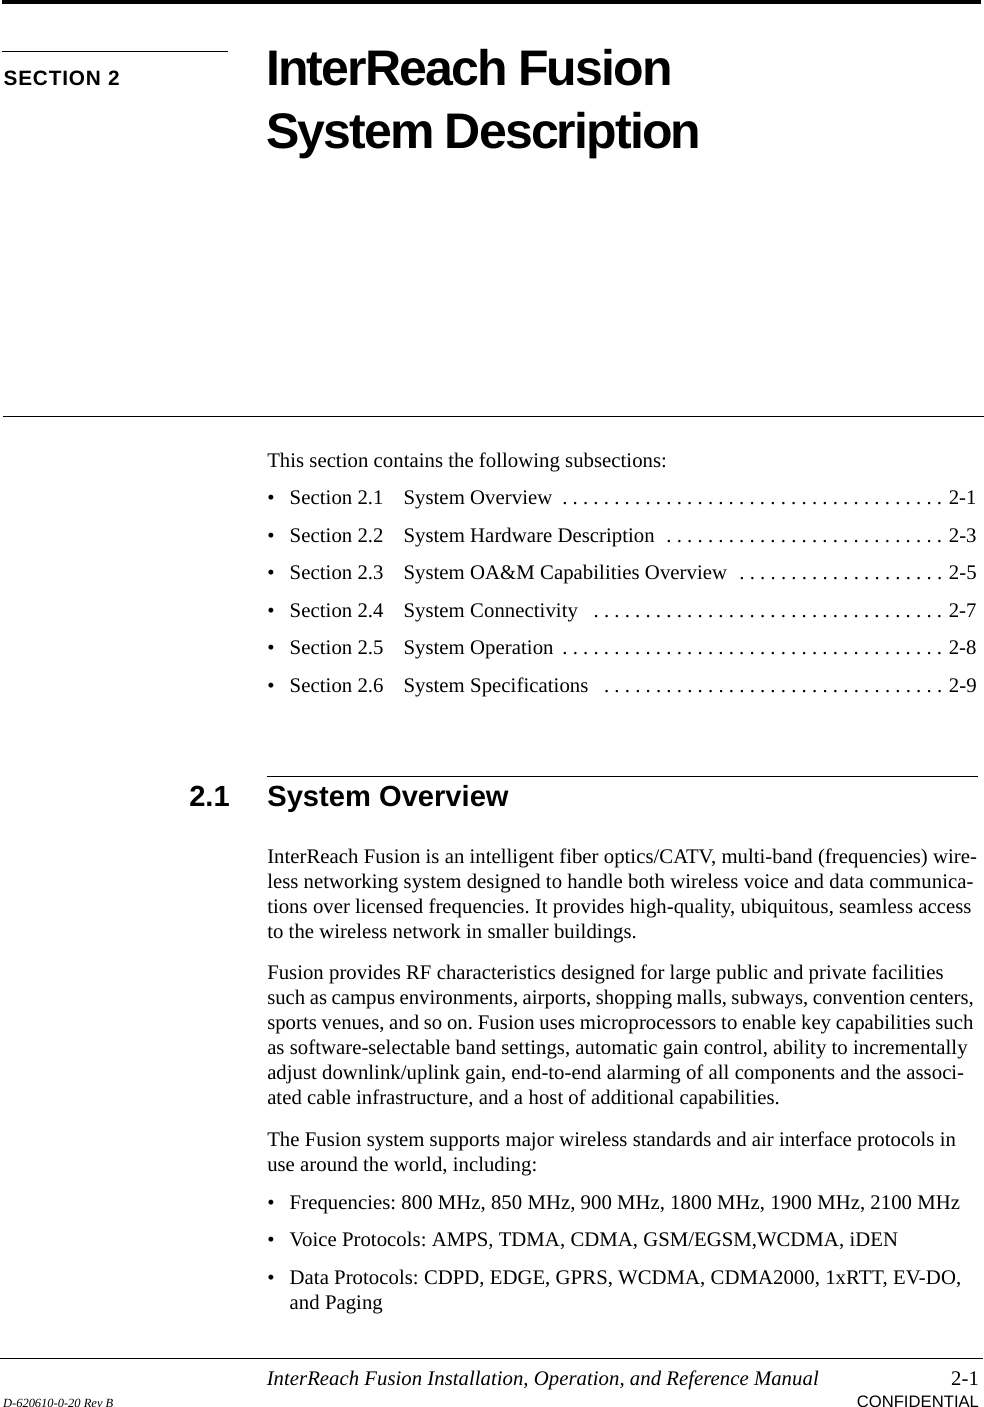 InterReach Fusion Installation, Operation, and Reference Manual 2-1D-620610-0-20 Rev B CONFIDENTIALSECTION 2 InterReach Fusion System DescriptionThis section contains the following subsections:• Section 2.1   System Overview  . . . . . . . . . . . . . . . . . . . . . . . . . . . . . . . . . . . . . 2-1• Section 2.2   System Hardware Description  . . . . . . . . . . . . . . . . . . . . . . . . . . . 2-3• Section 2.3   System OA&amp;M Capabilities Overview  . . . . . . . . . . . . . . . . . . . . 2-5• Section 2.4   System Connectivity   . . . . . . . . . . . . . . . . . . . . . . . . . . . . . . . . . . 2-7• Section 2.5   System Operation  . . . . . . . . . . . . . . . . . . . . . . . . . . . . . . . . . . . . . 2-8• Section 2.6   System Specifications   . . . . . . . . . . . . . . . . . . . . . . . . . . . . . . . . . 2-92.1 System OverviewInterReach Fusion is an intelligent fiber optics/CATV, multi-band (frequencies) wire-less networking system designed to handle both wireless voice and data communica-tions over licensed frequencies. It provides high-quality, ubiquitous, seamless access to the wireless network in smaller buildings.Fusion provides RF characteristics designed for large public and private facilities such as campus environments, airports, shopping malls, subways, convention centers, sports venues, and so on. Fusion uses microprocessors to enable key capabilities such as software-selectable band settings, automatic gain control, ability to incrementally adjust downlink/uplink gain, end-to-end alarming of all components and the associ-ated cable infrastructure, and a host of additional capabilities.The Fusion system supports major wireless standards and air interface protocols in use around the world, including:• Frequencies: 800 MHz, 850 MHz, 900 MHz, 1800 MHz, 1900 MHz, 2100 MHz• Voice Protocols: AMPS, TDMA, CDMA, GSM/EGSM,WCDMA, iDEN• Data Protocols: CDPD, EDGE, GPRS, WCDMA, CDMA2000, 1xRTT, EV-DO, and Paging